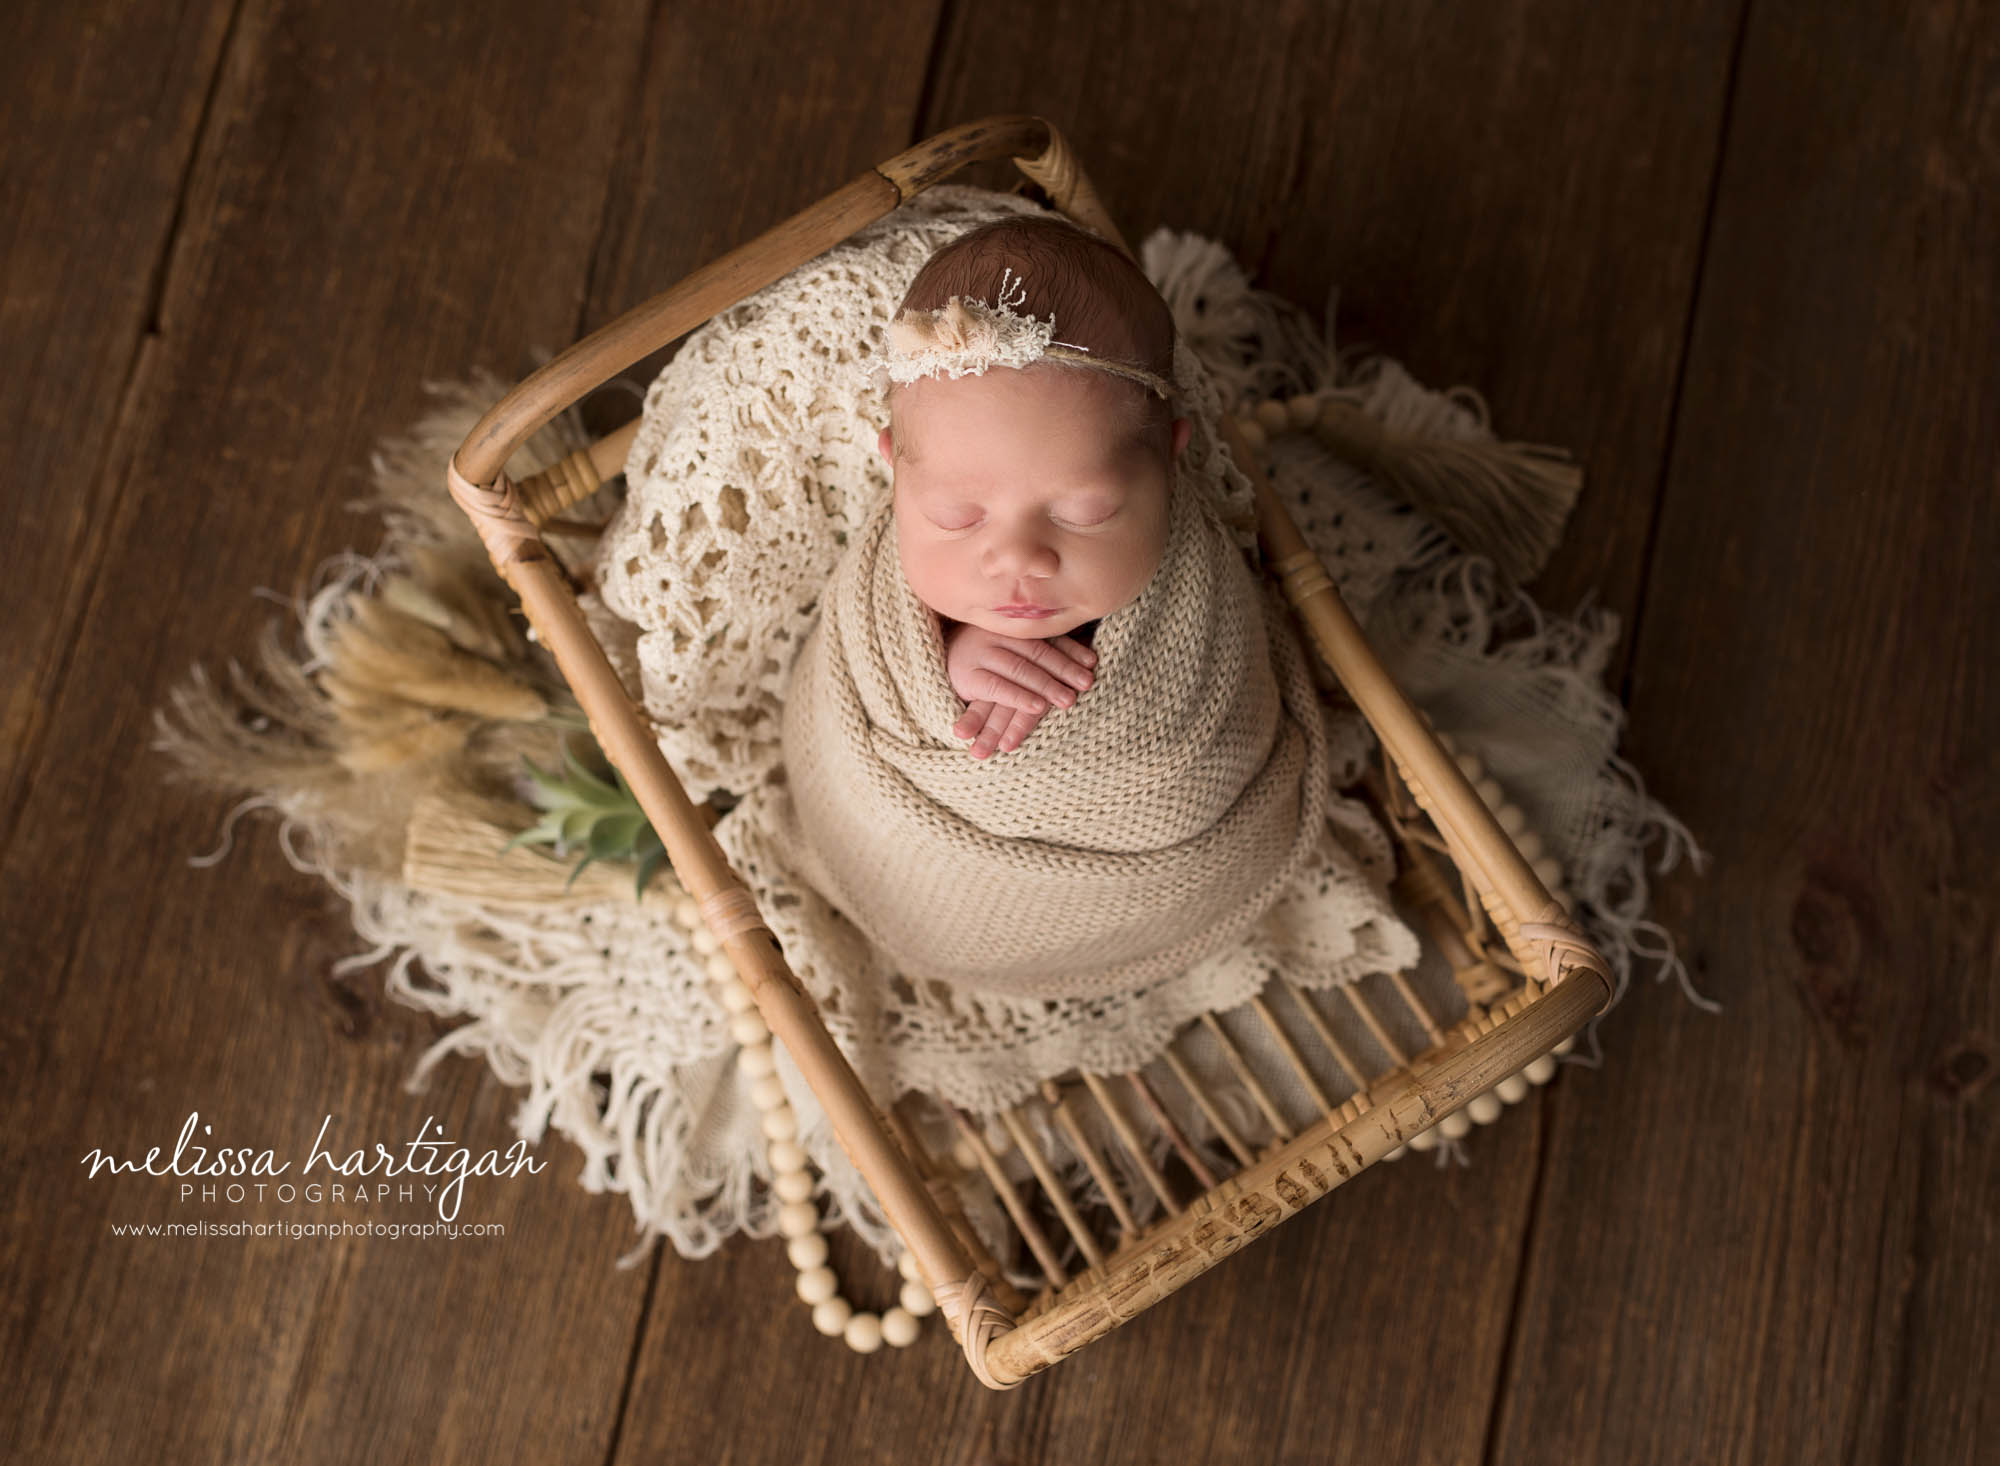 newborn baby girl wrapped in knitted wrap posed in basket